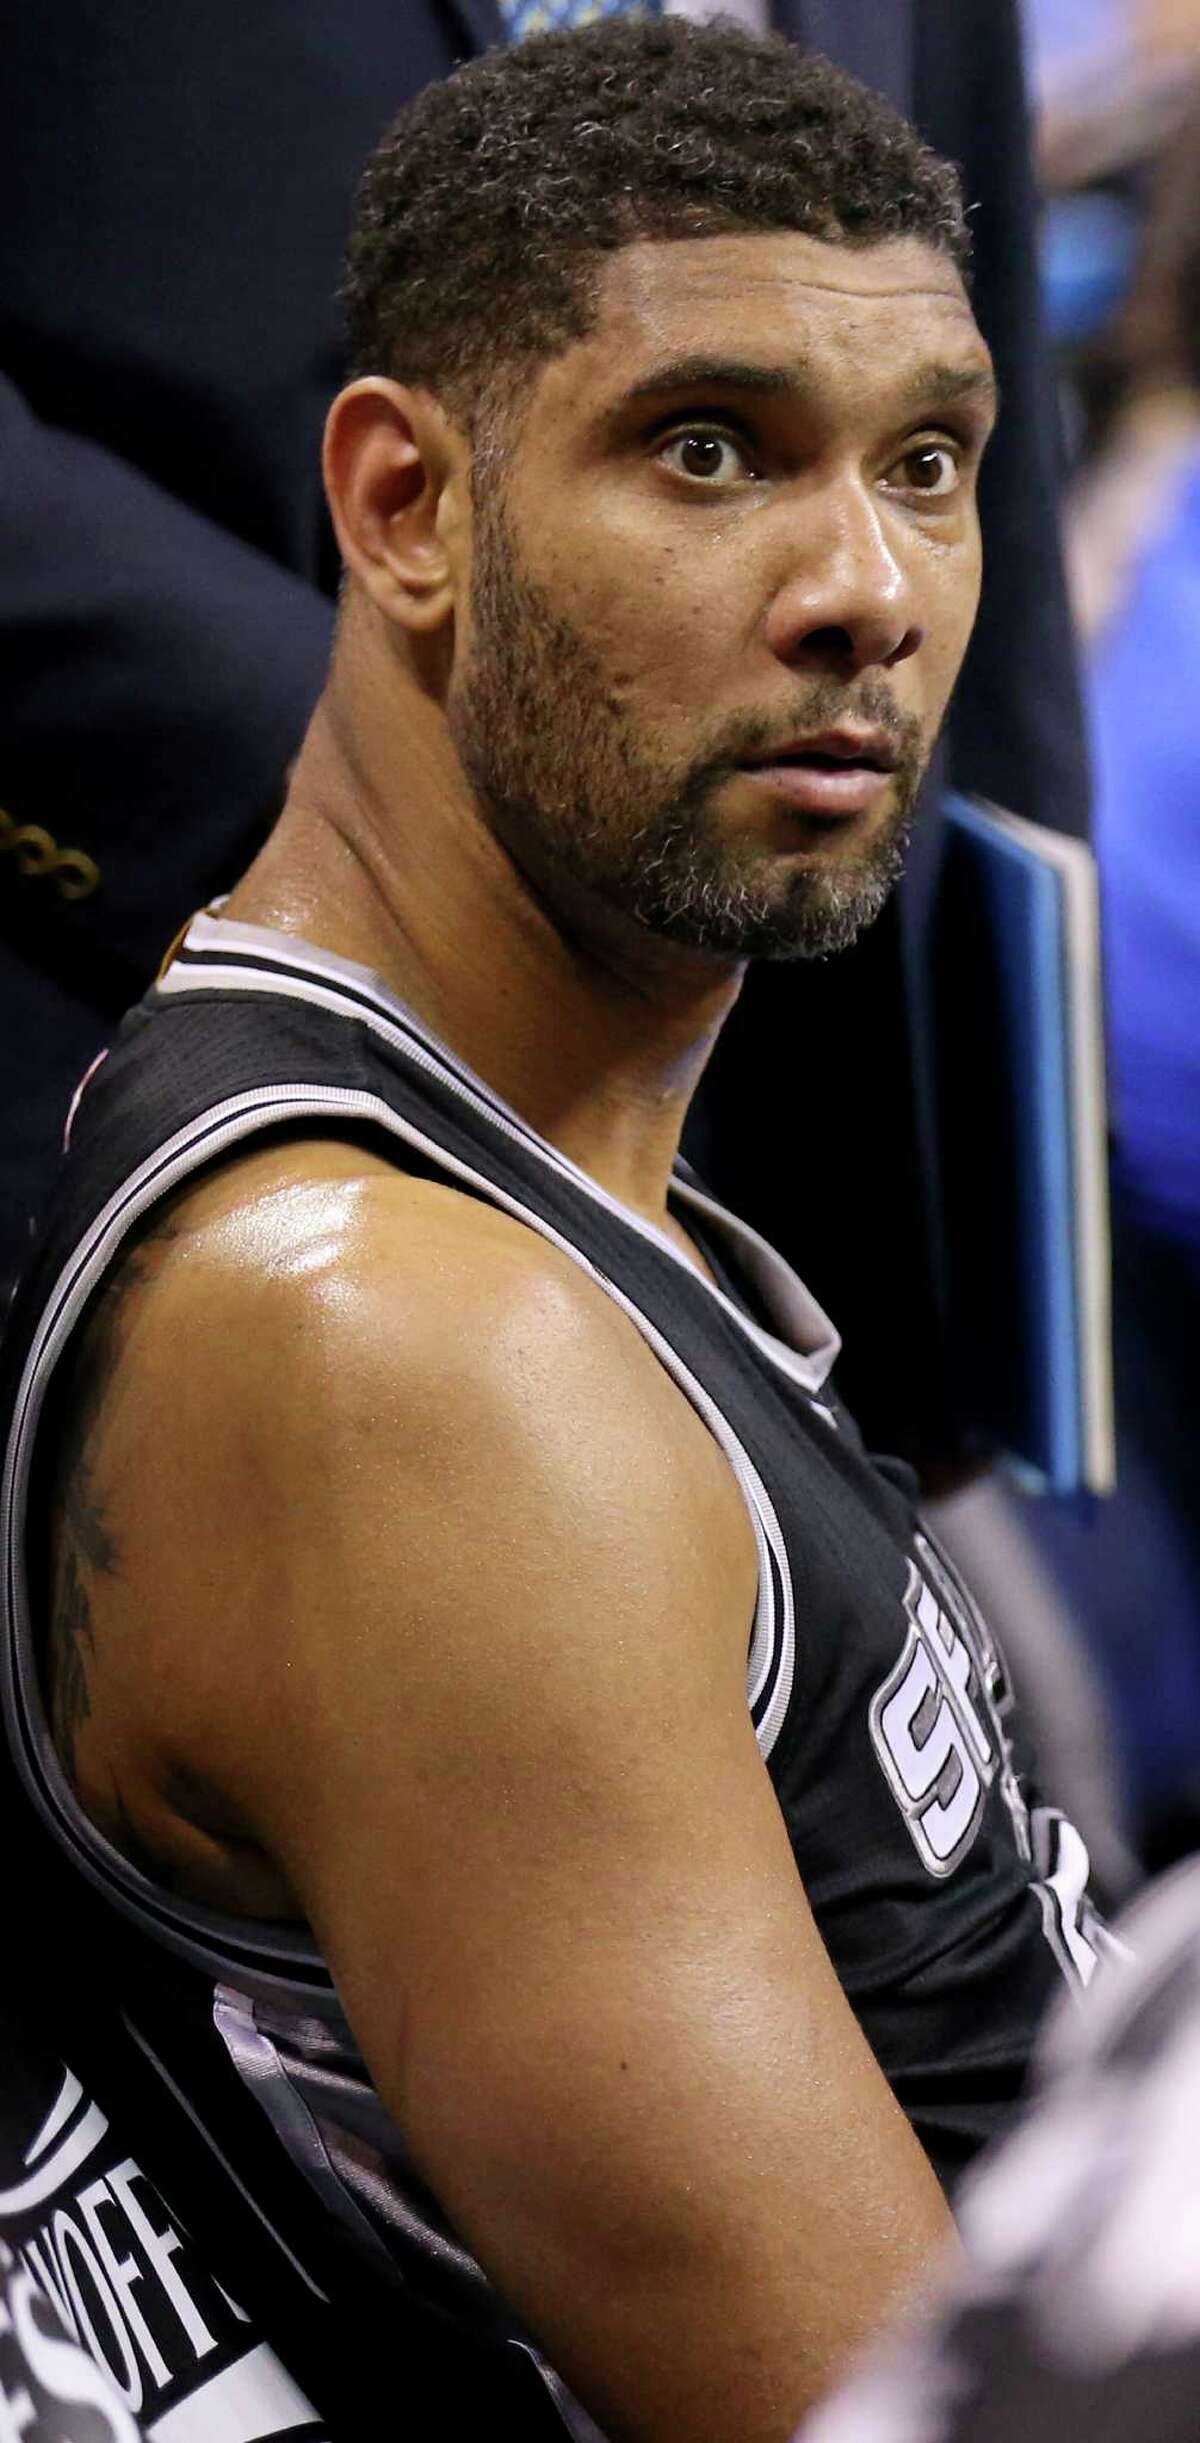 Spurs’ Tim Duncan sits on the bench during second half action of Game 6 in the Western Conference semifinals against the Oklahoma City Thunder on May 12, 2016 at Chesapeake Energy Arena.